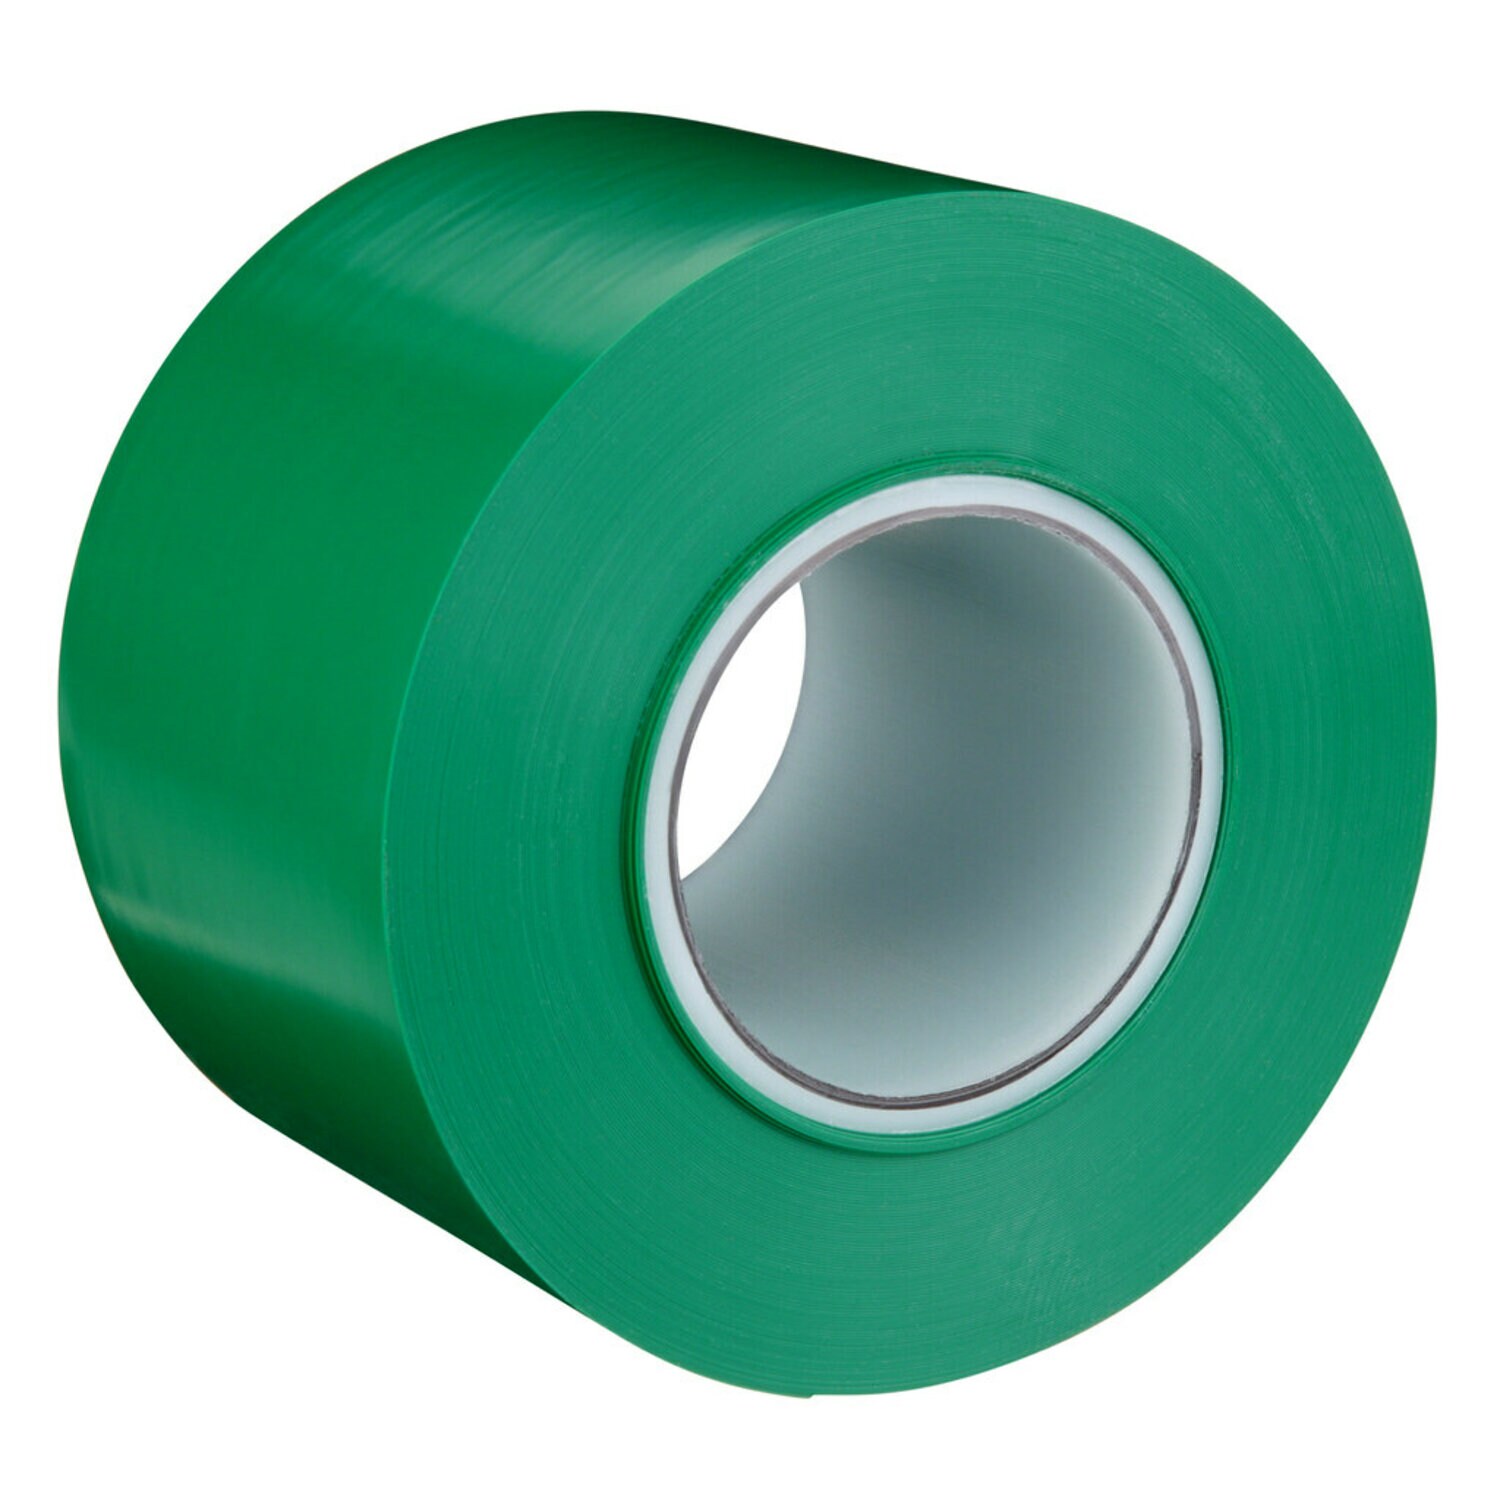 7100254033 - 3M Durable Floor Marking Tape 971, Green, 4 in x 36 yd, 17 mil, 3 Rolls/Case, Individually Wrapped Conveniently Packaged